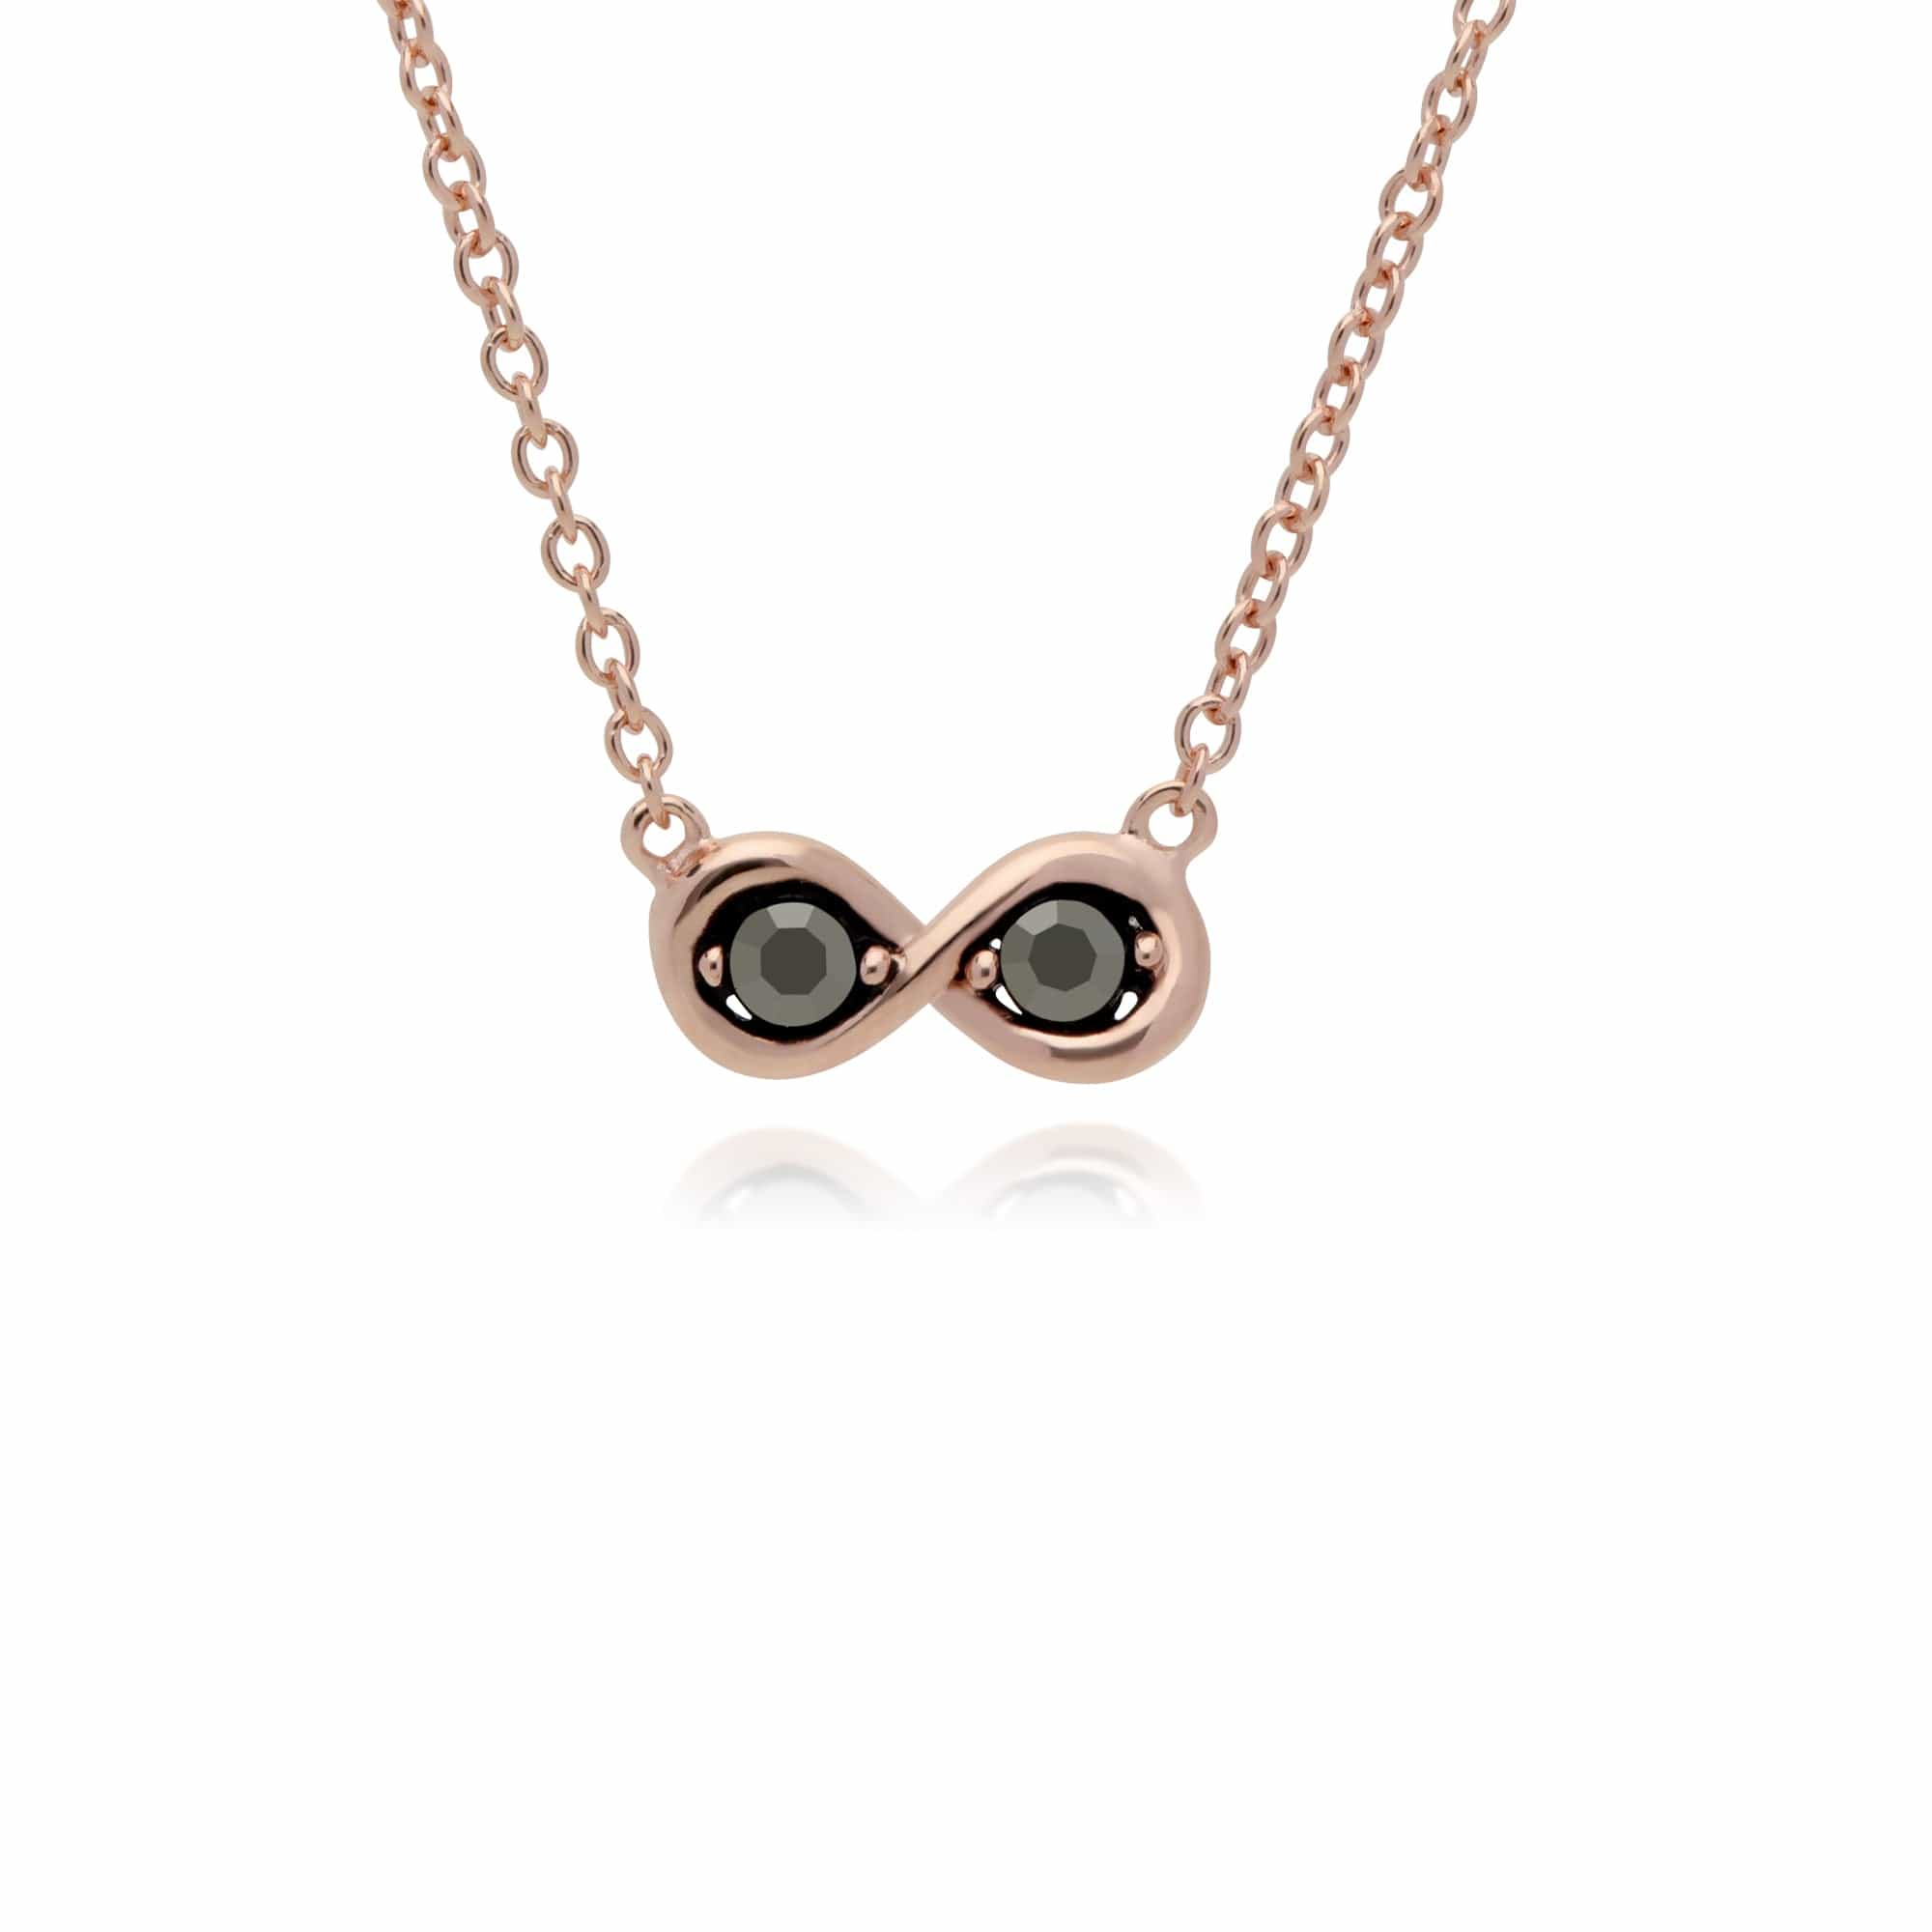 224E025401925-224N017801925 Rose Gold Plated Marcasite Infinity Stud Earrings & Necklace Set in 925 Sterling Silver 3